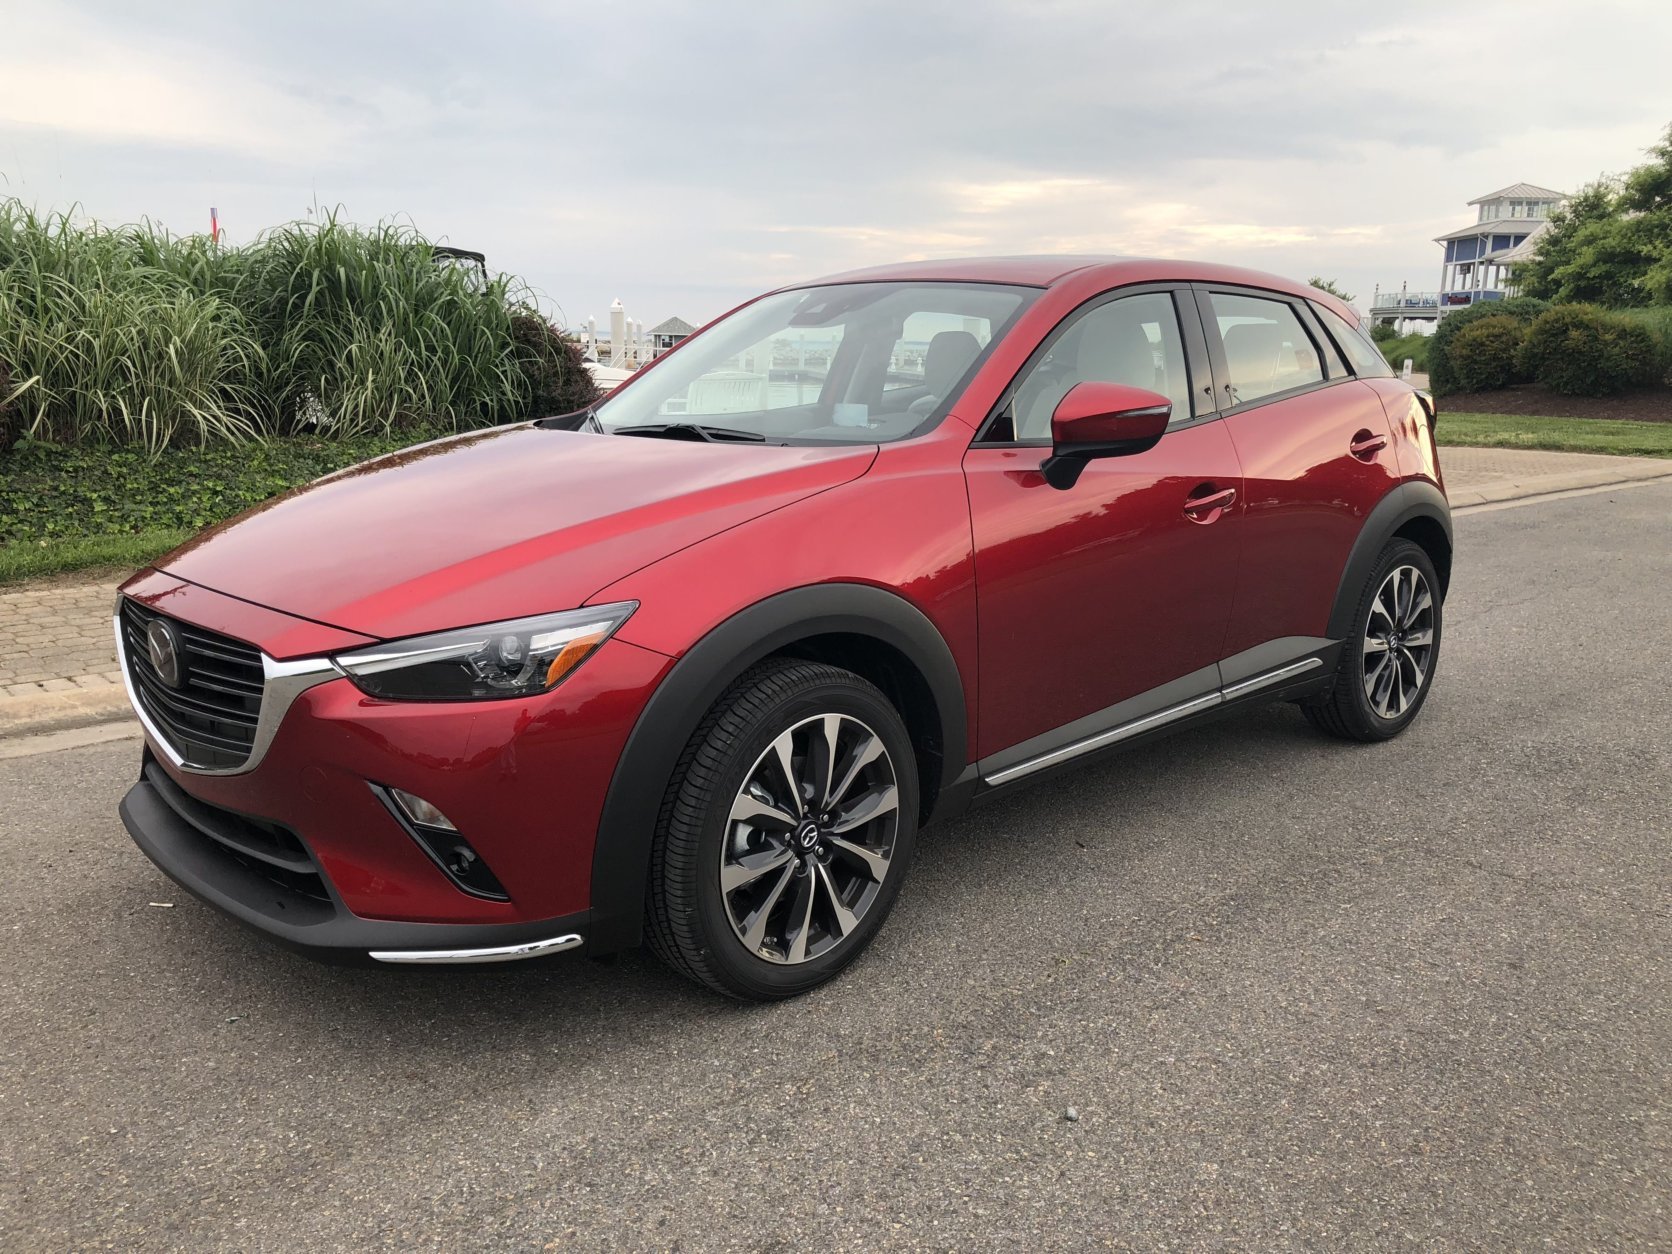 Car Review: Do Mazda's crossovers live up to brand's fun ...